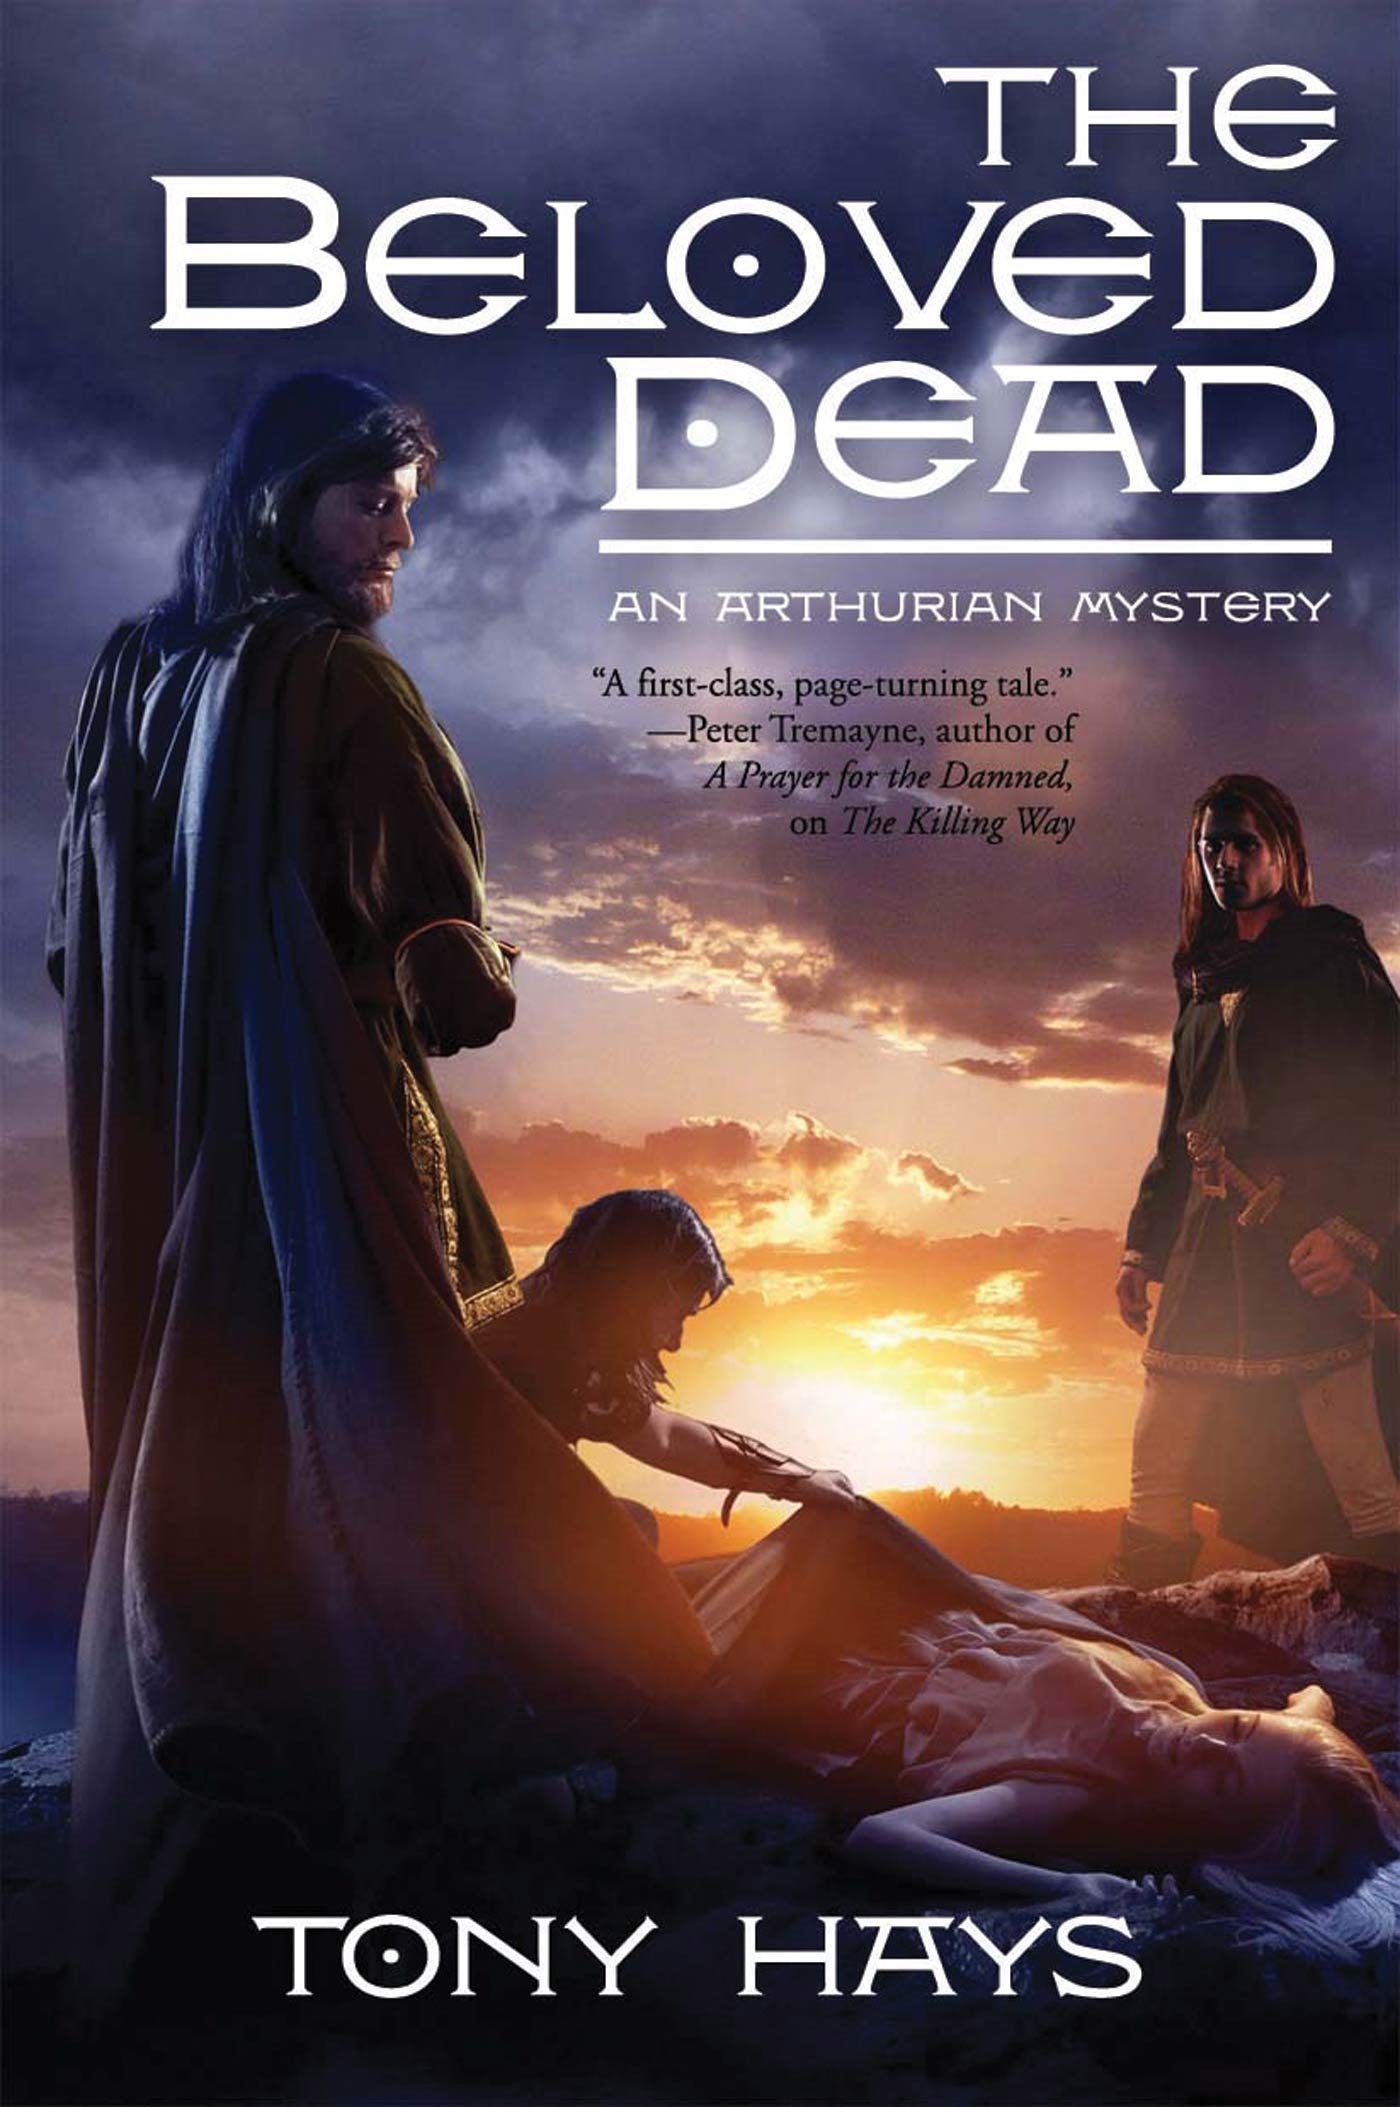 The Beloved Dead : An Arthurian Mystery by Tony Hays